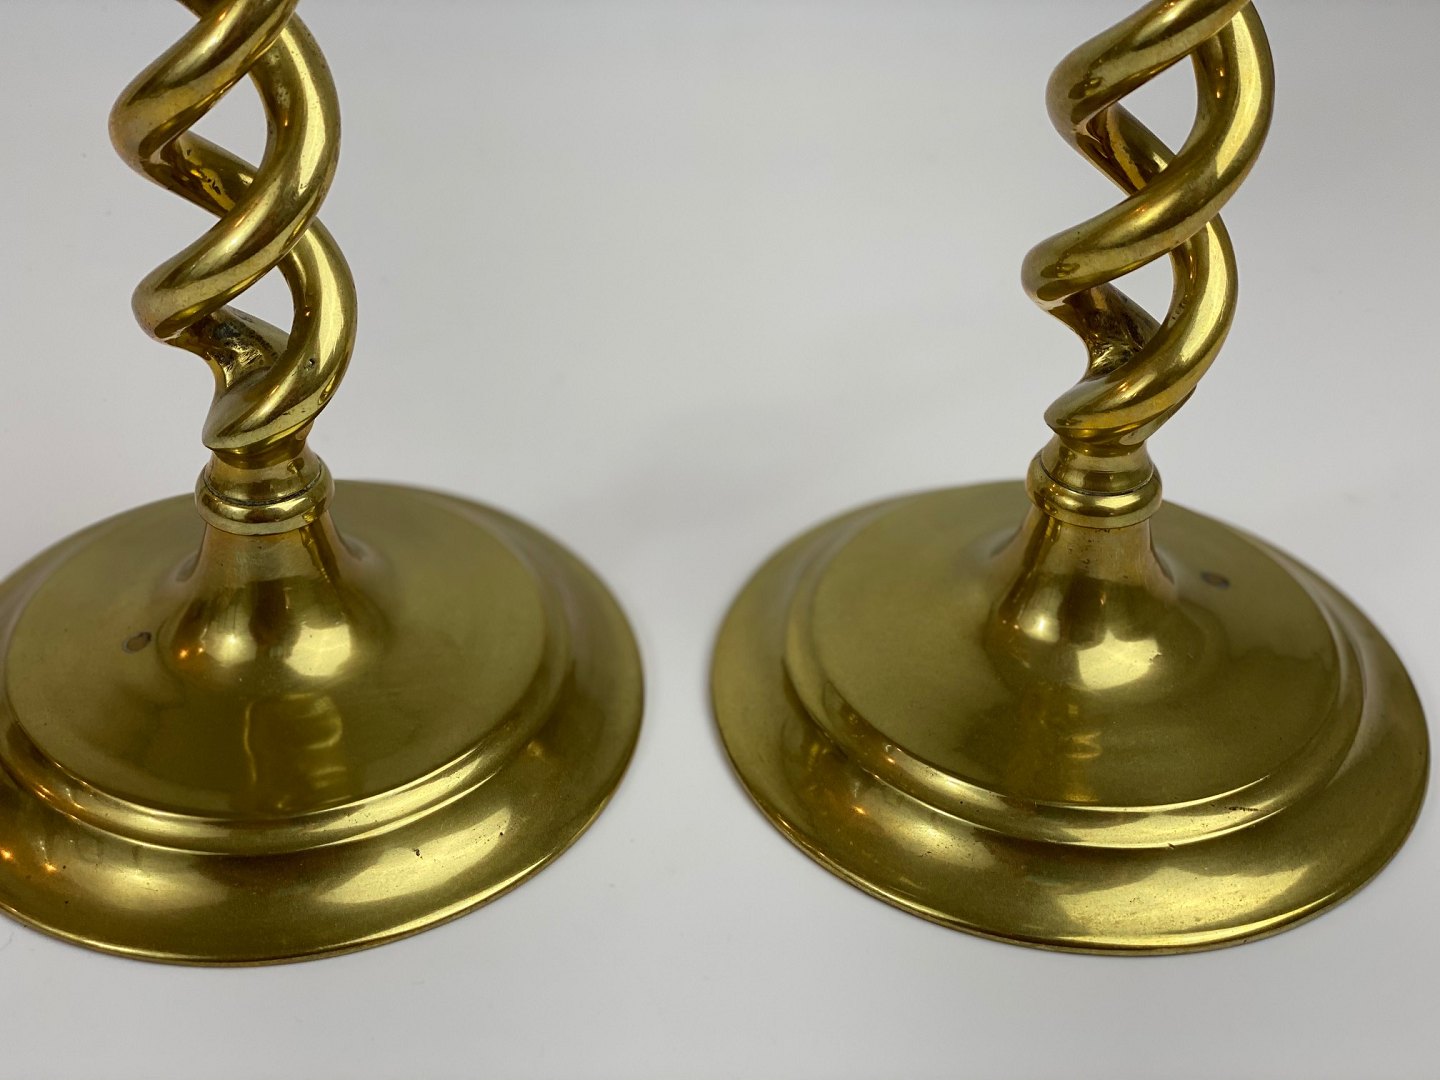  Pair of large, English, antique, open barley twist brass  candlesticks for standard-size candles.